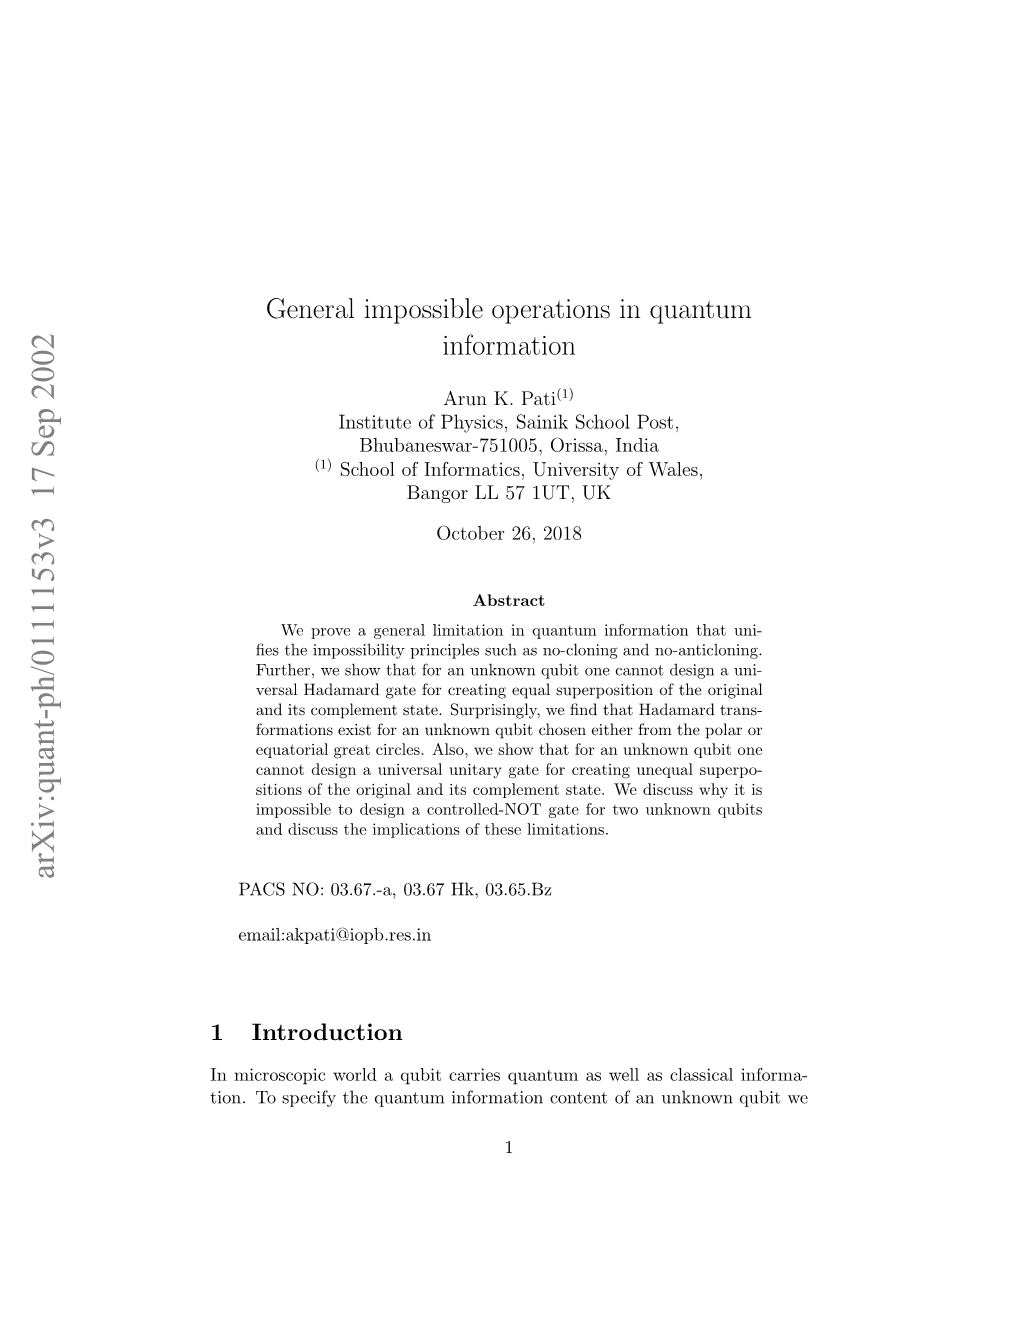 General Impossible Operations in Quantum Information